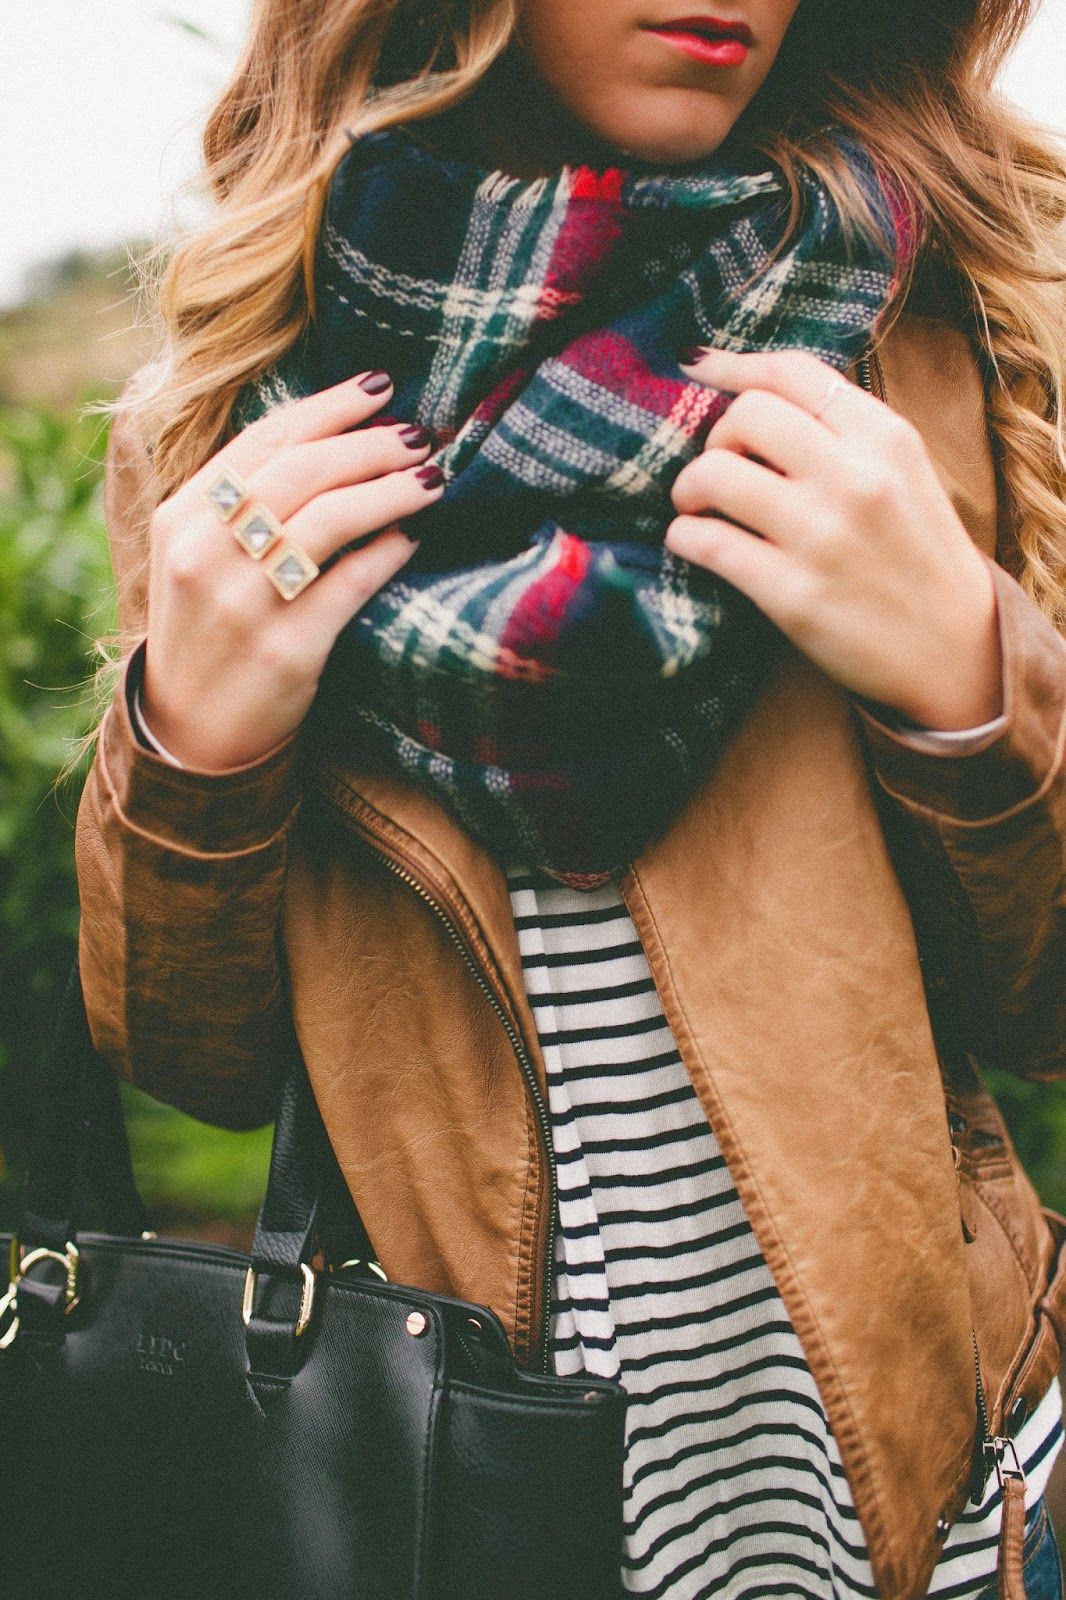 Dresses With Scarves, Slow fashion, Neck gaiter: winter outfits,  fashion blogger,  Fashion outfits,  Scarves Outfits,  Neck gaiter,  Plaid Scarf  